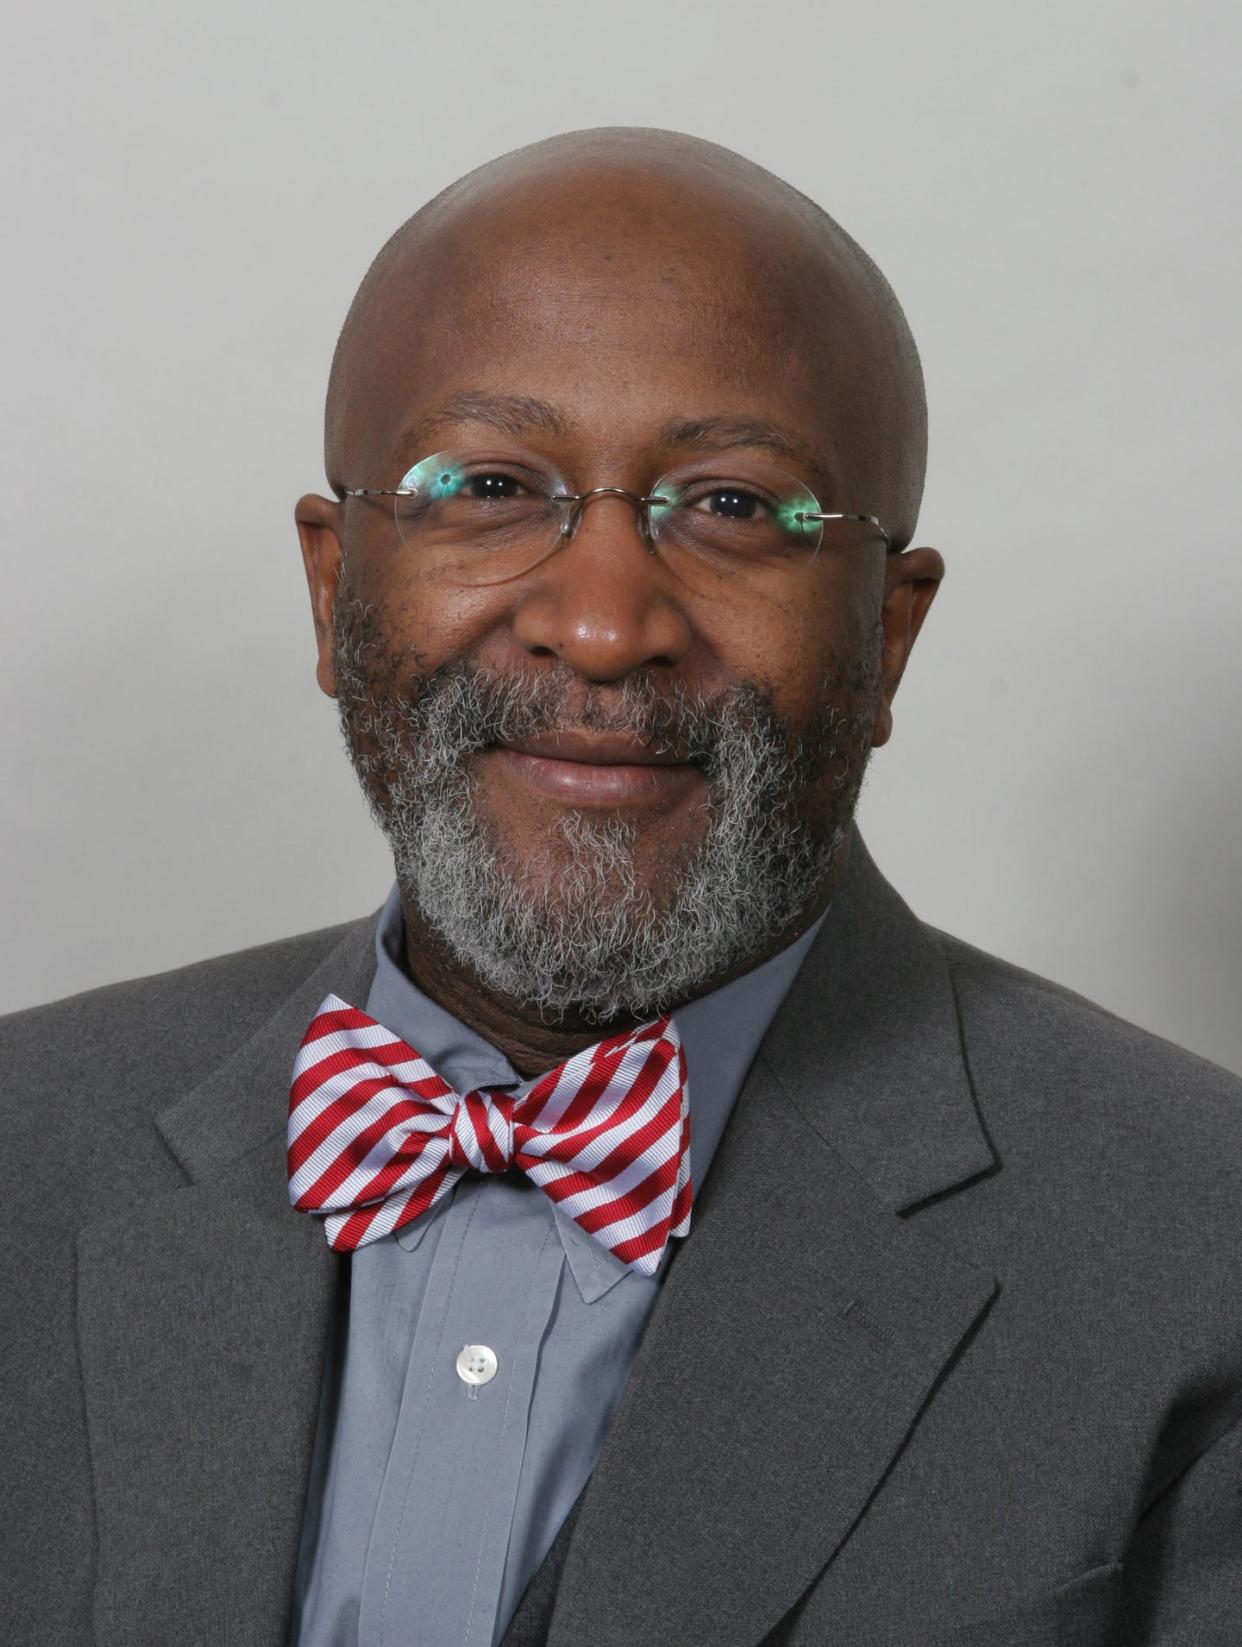 Dr. Dwight Mullen was one of the first Black professors at the University of North Carolina Asheville and is responsible for many newly established programs there, including Native American Studies.